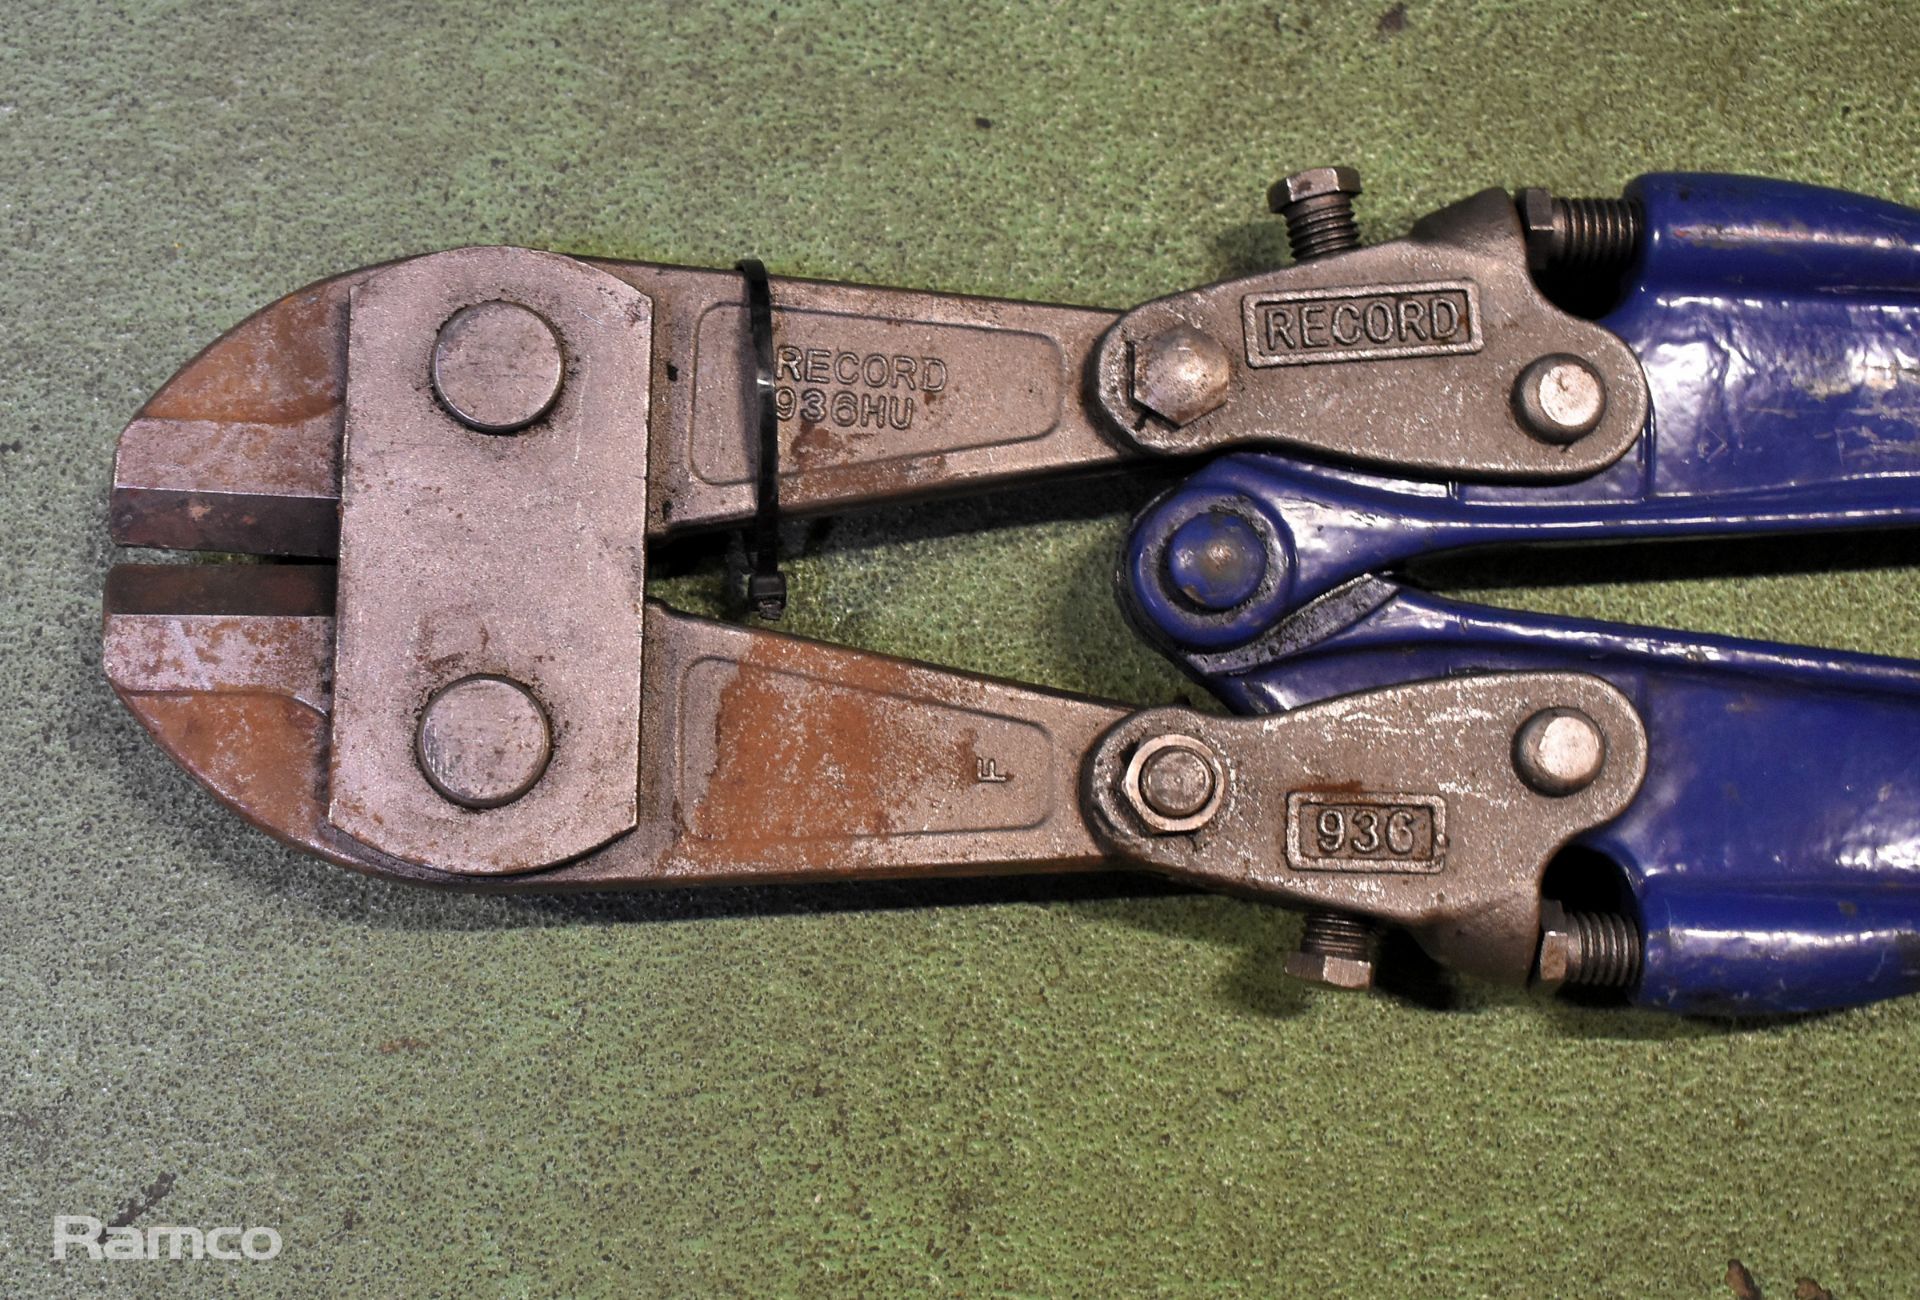 Irwin Record 936HU high tensile drop forged steel bolt cutters - Image 3 of 3